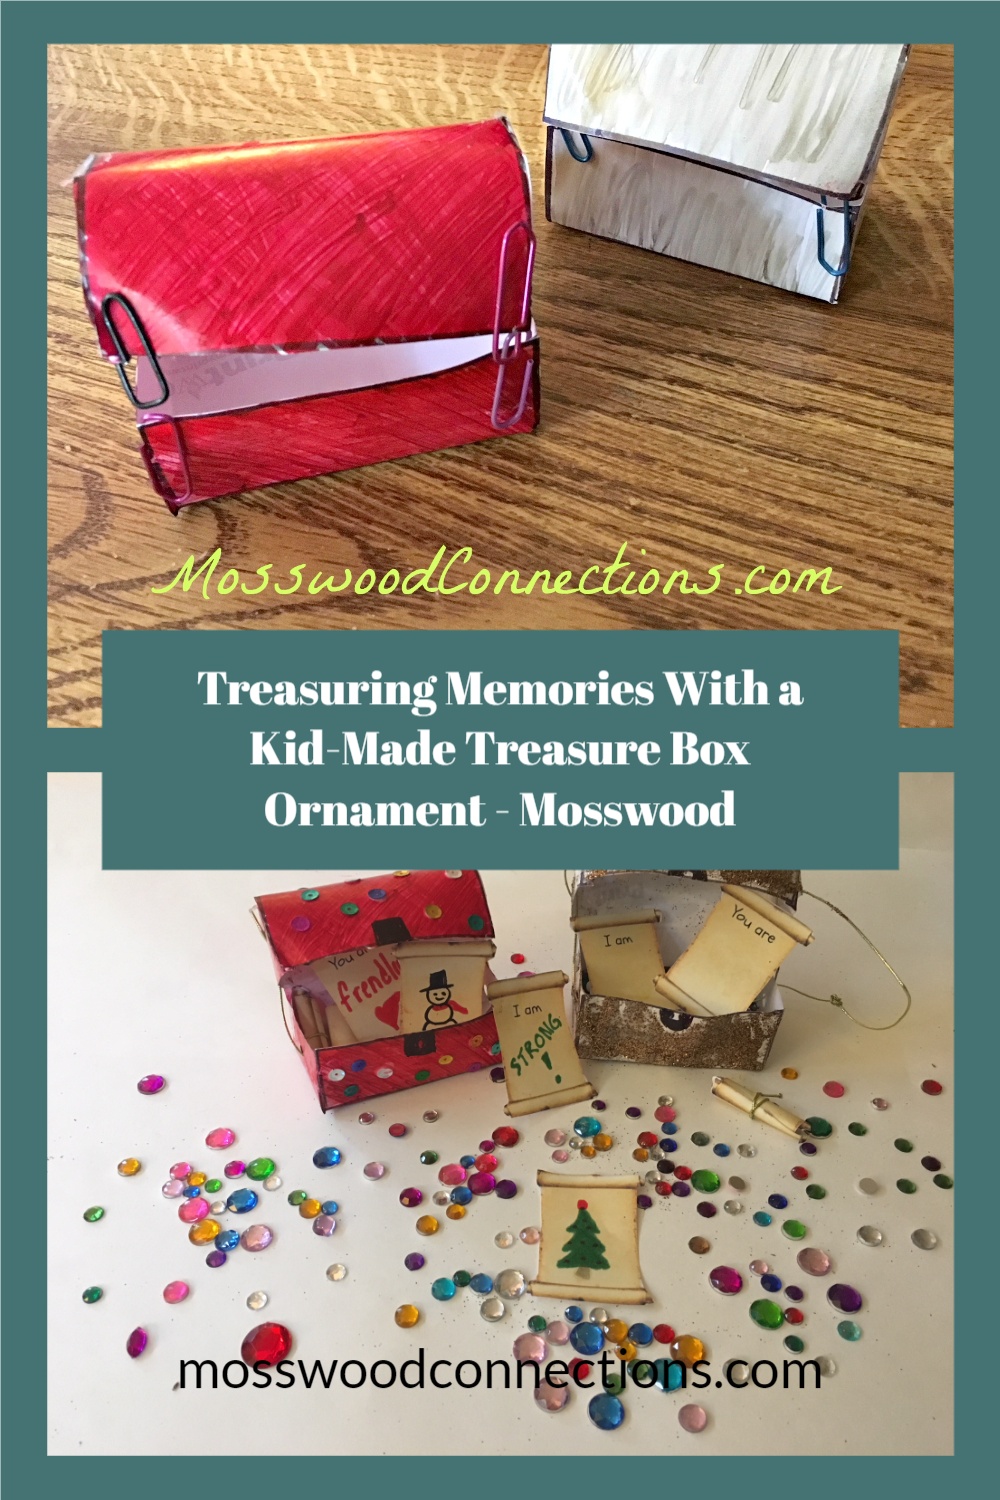 Treasuring Memories With a Kid-Made Treasure Box Ornament #mosswoodconnections #kid-madedcorations #ornaments #crafts #holidays 